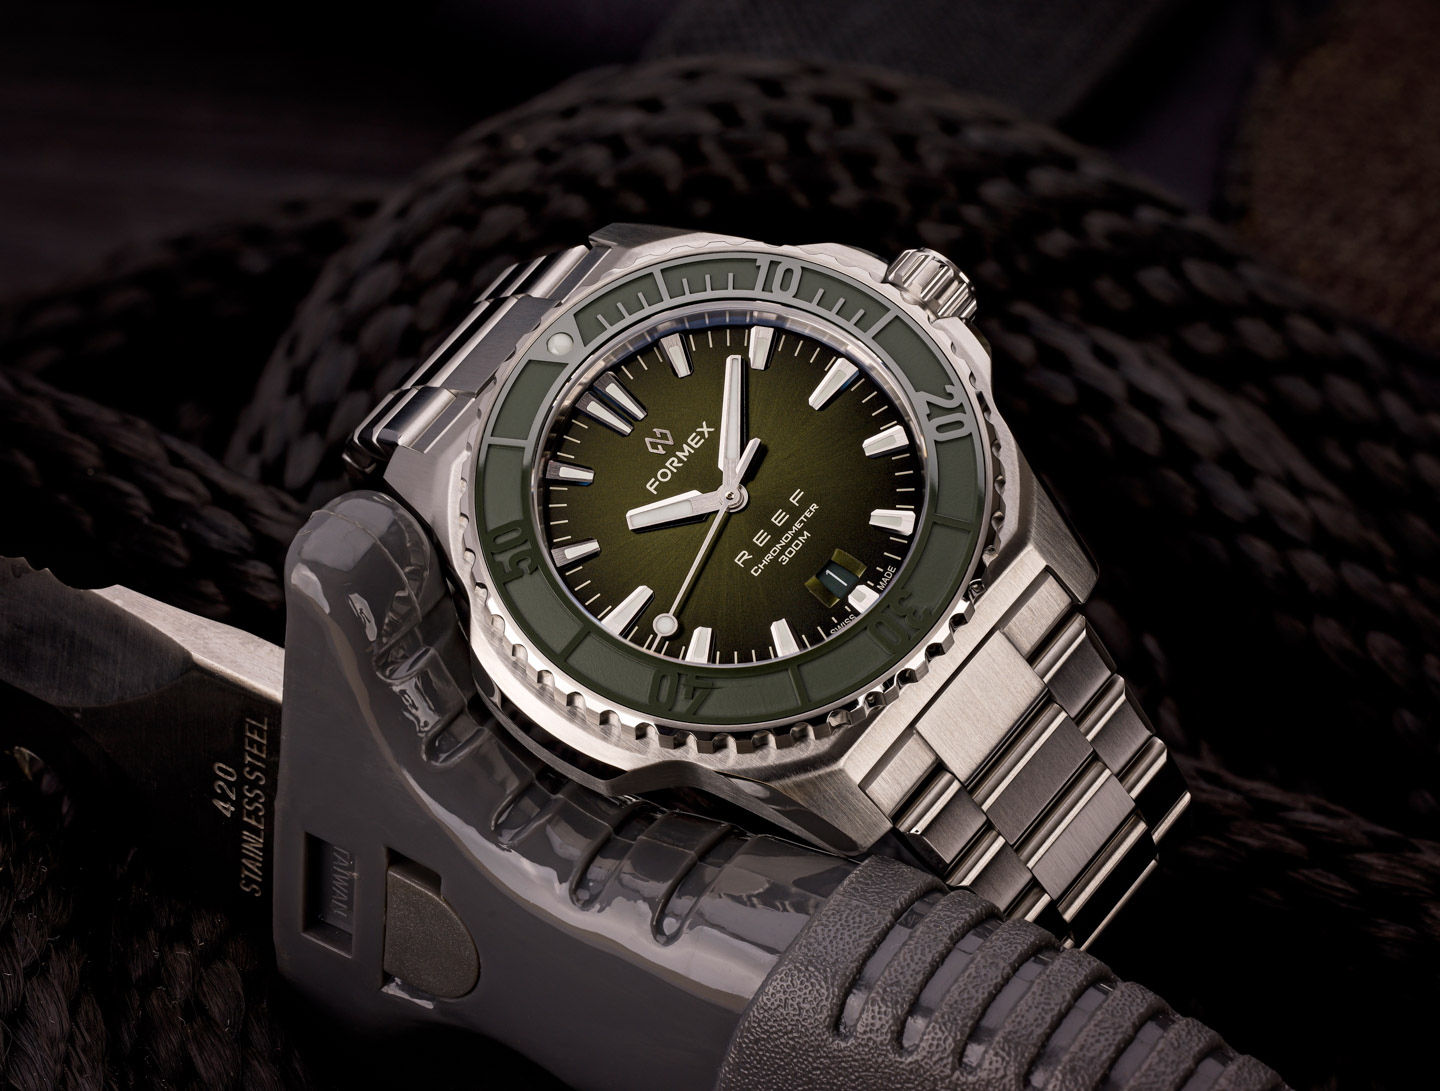 Swiss Formex Debuts The REEF Automatic Chronometer Diver’s Watch